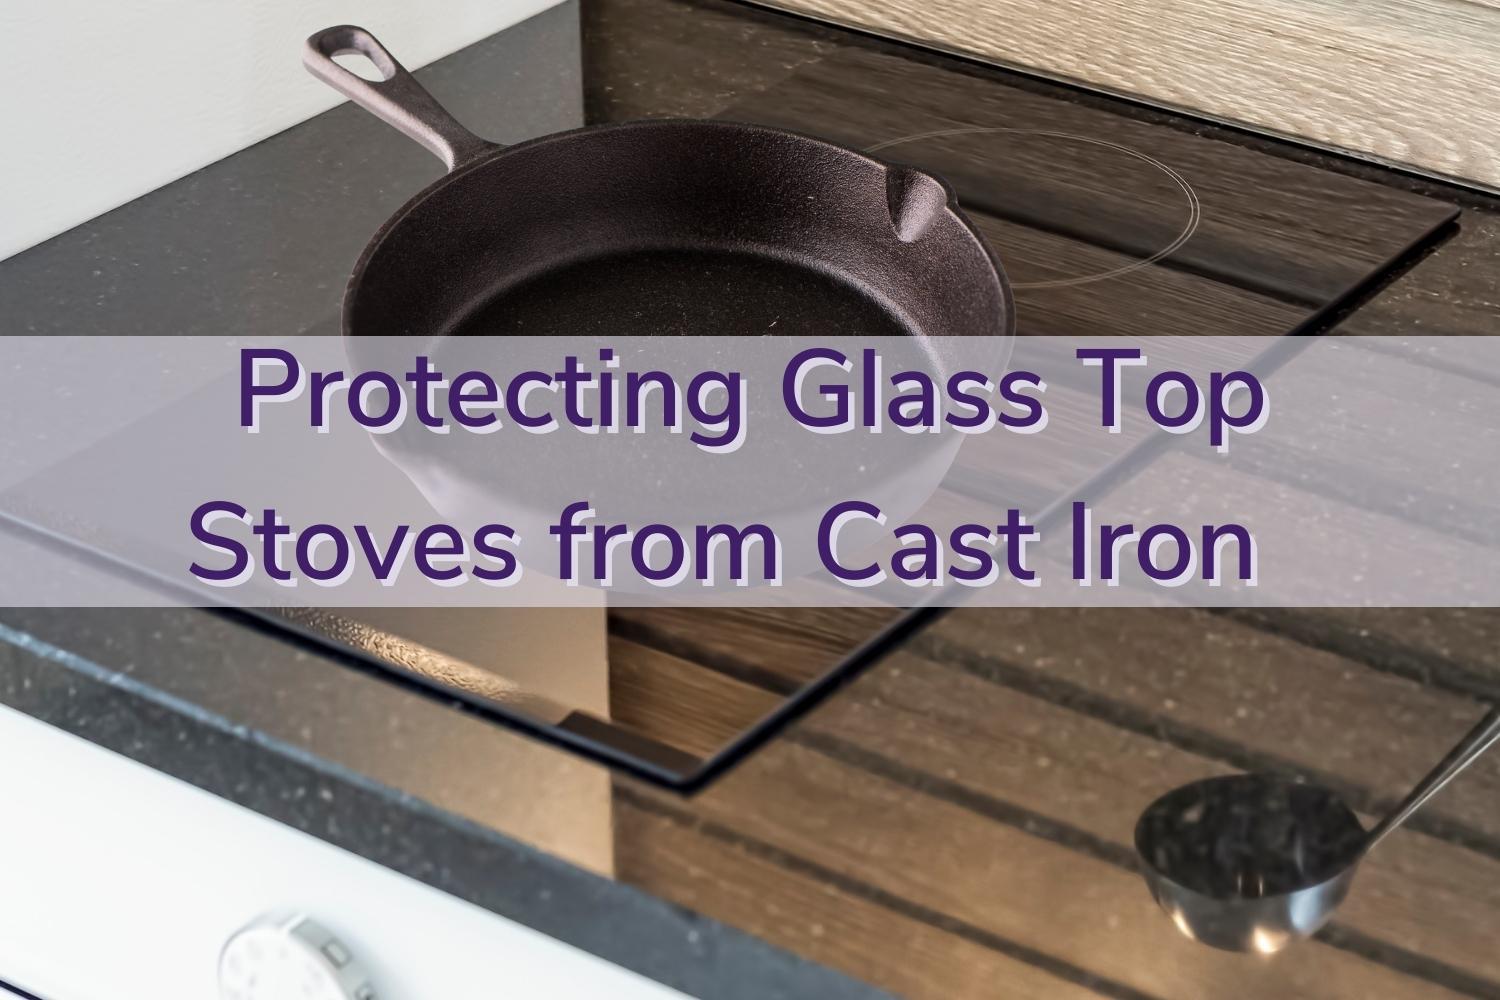 How To Protect Glass Top Stove From Cast Iron: Tips & Tricks